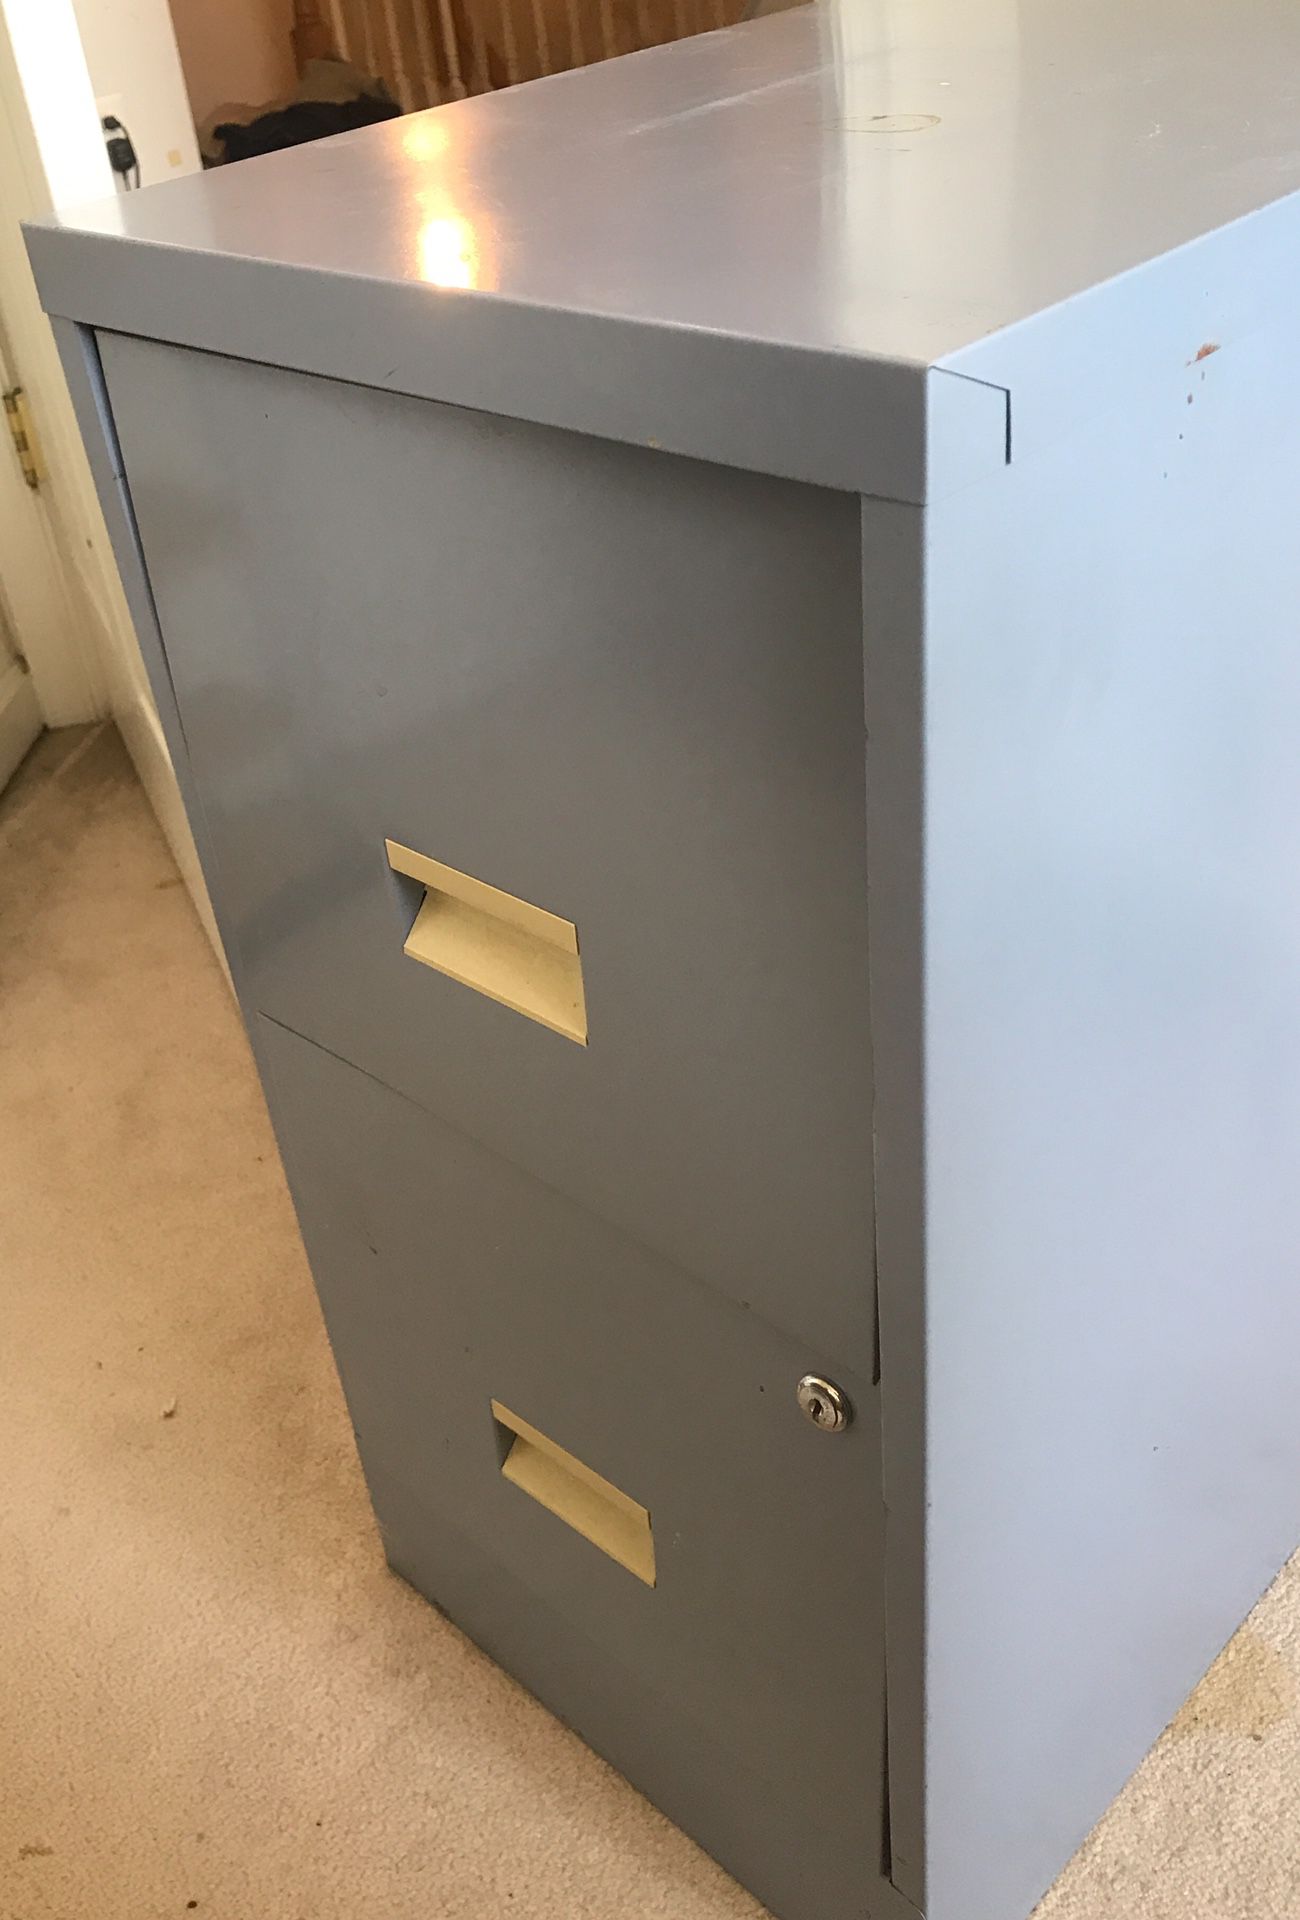 Filing cabinet. Doors don’t close properly